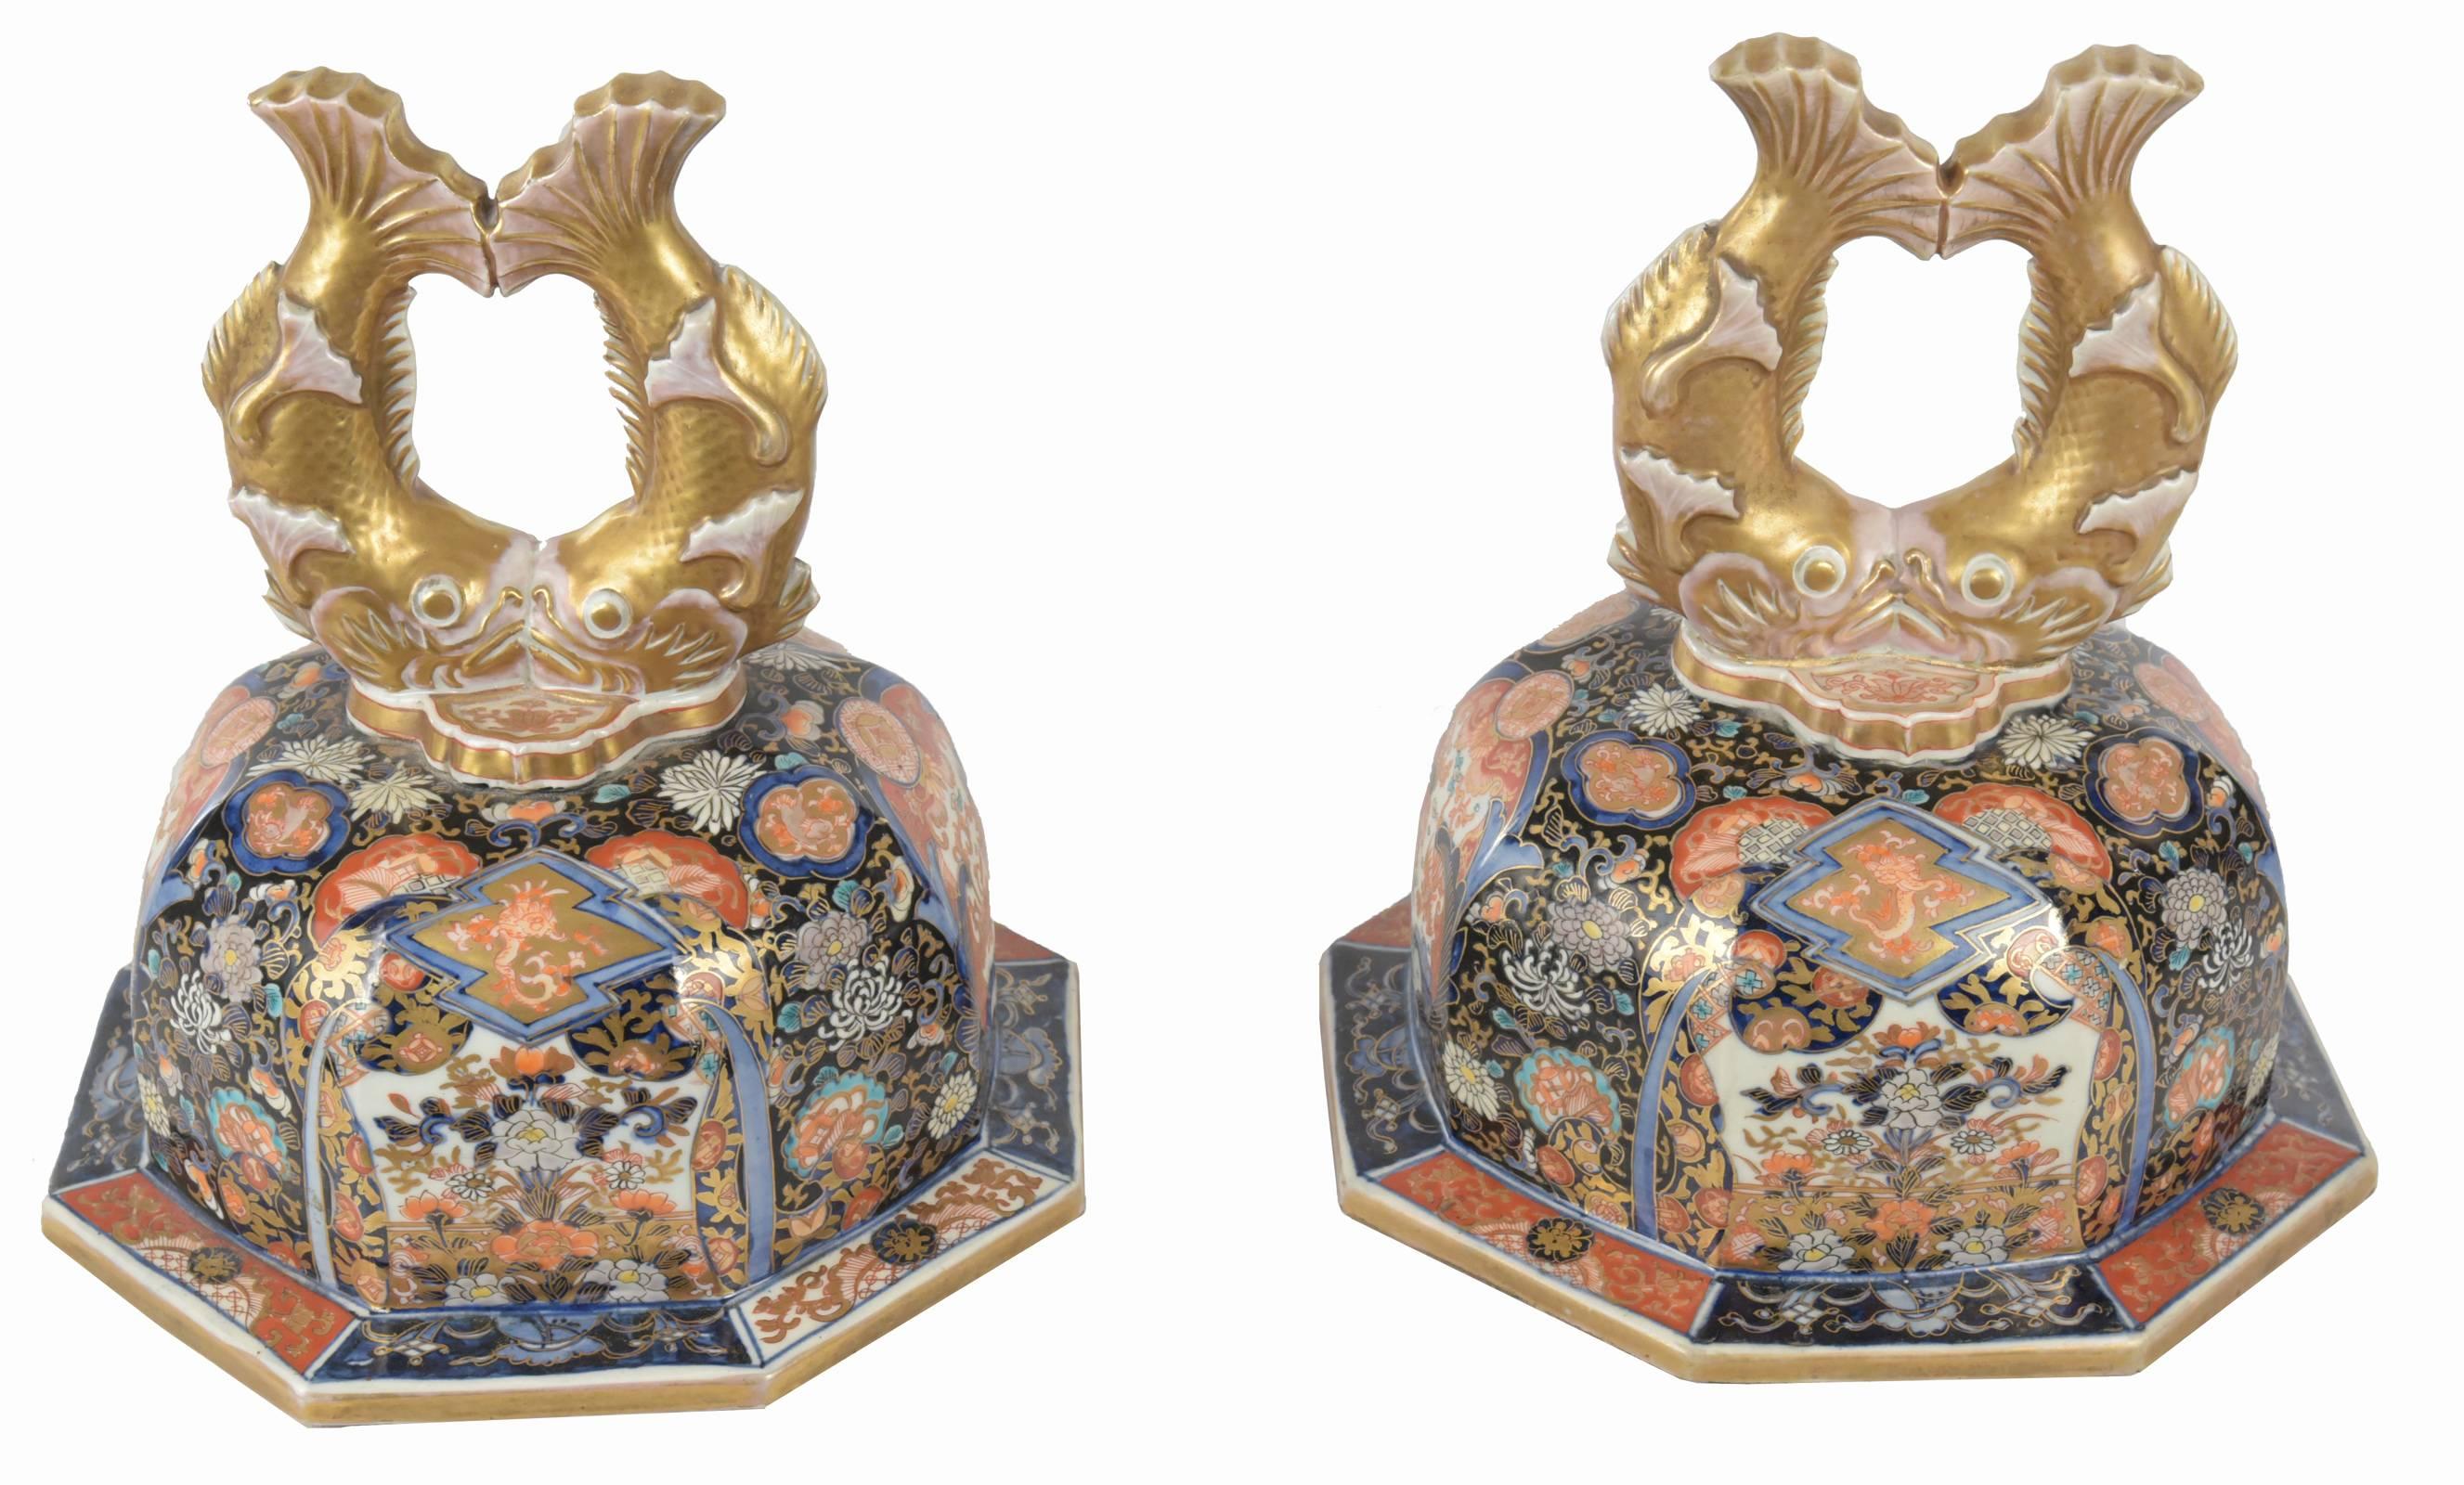 Pair of Imari Vases from the Estate of F.D. Roosevelt 1